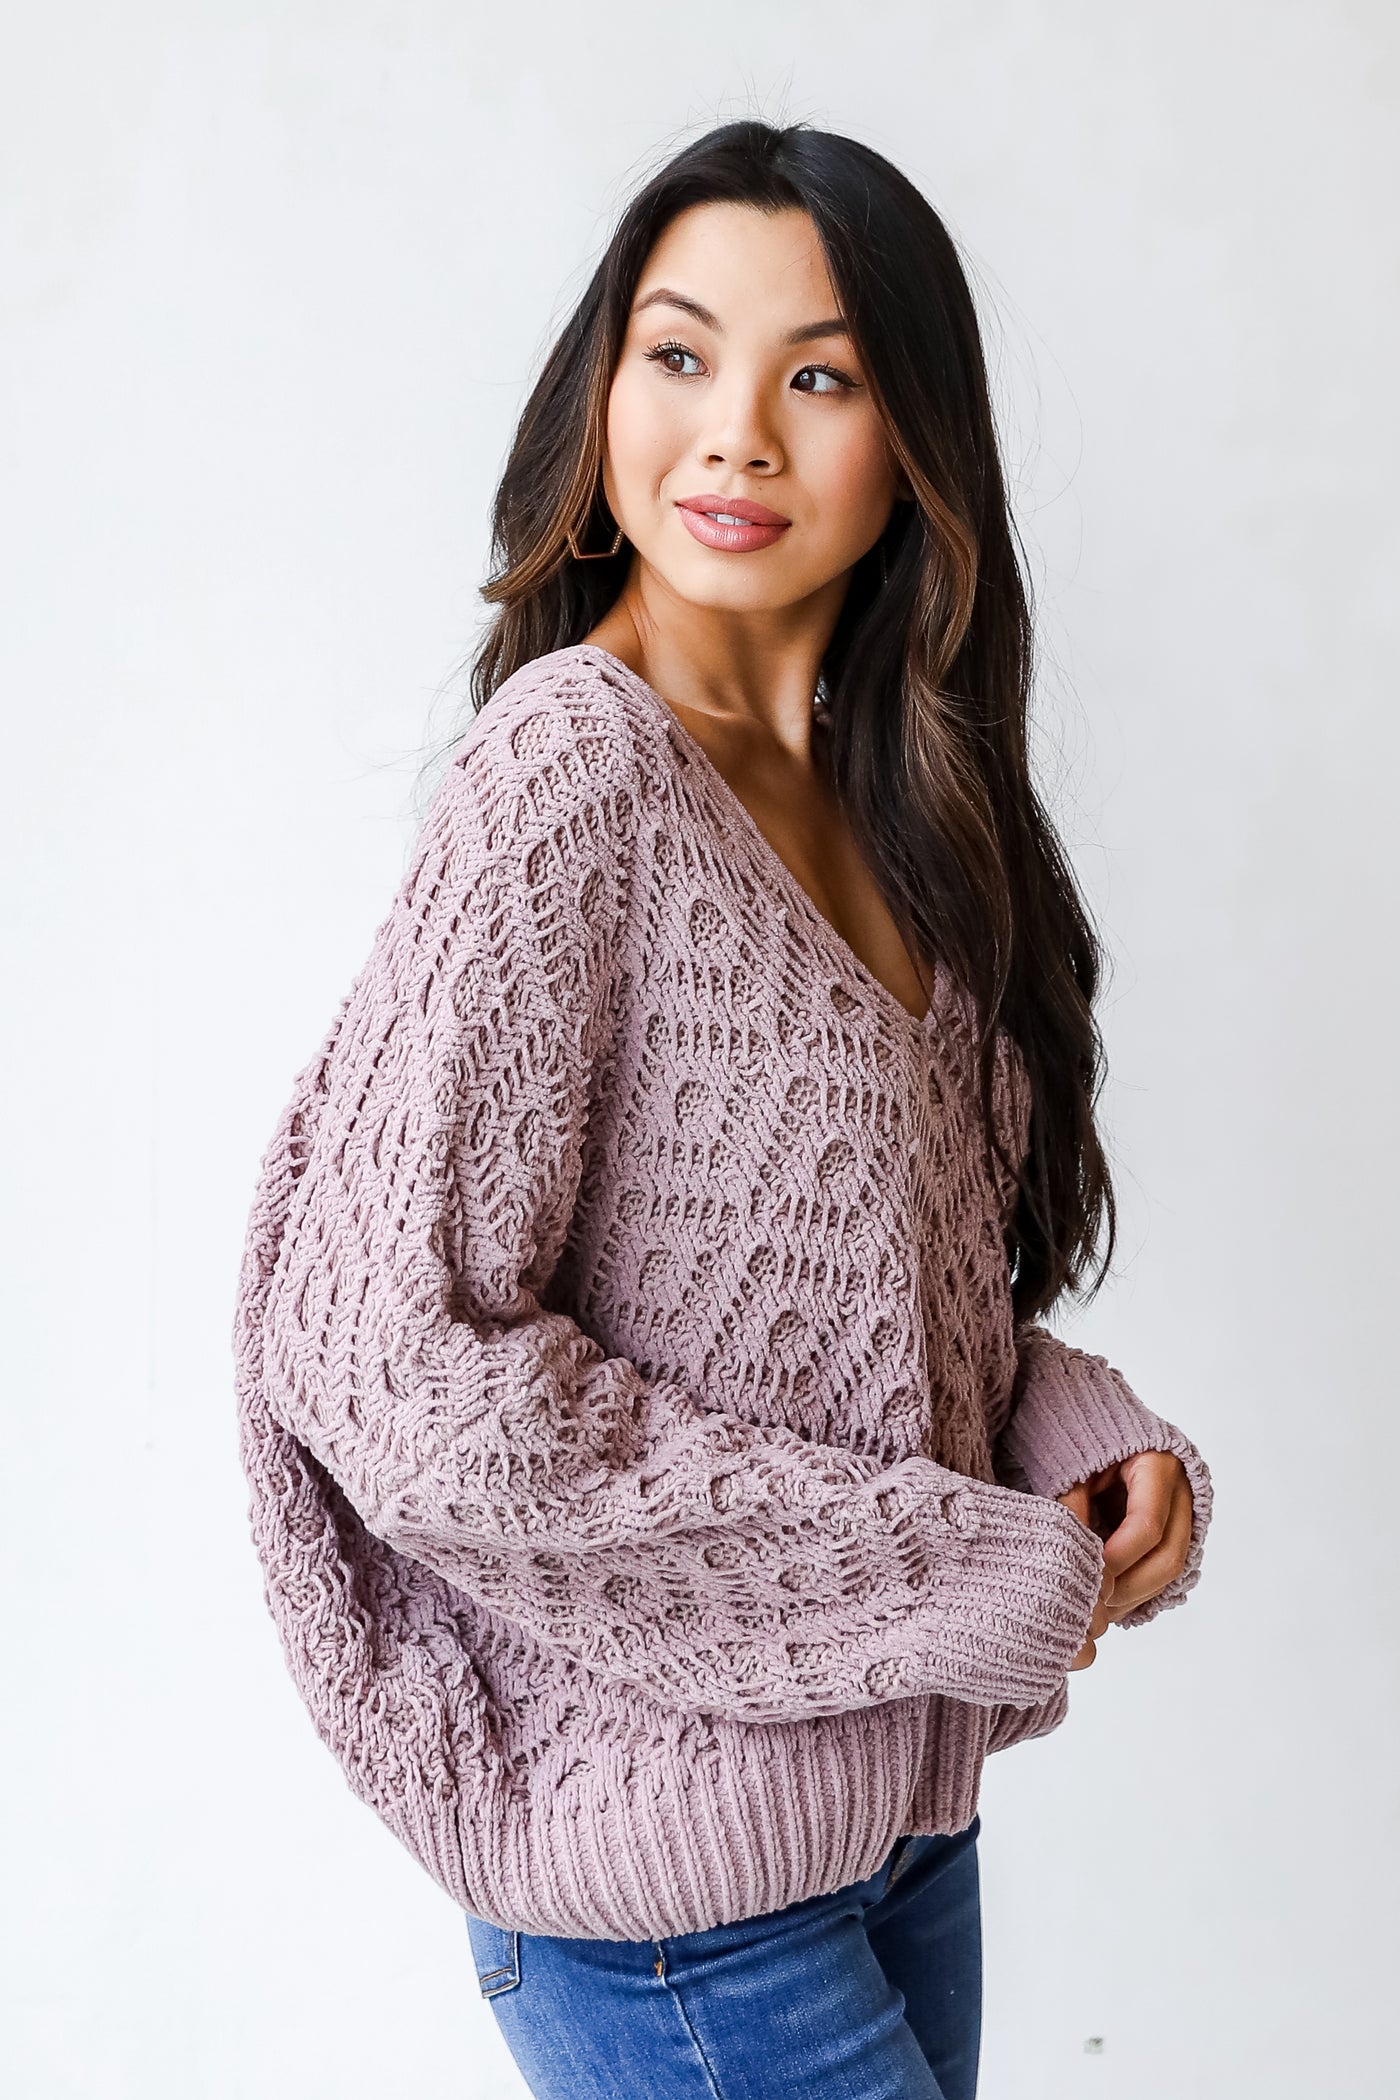 Chenille Sweater in mauve side view